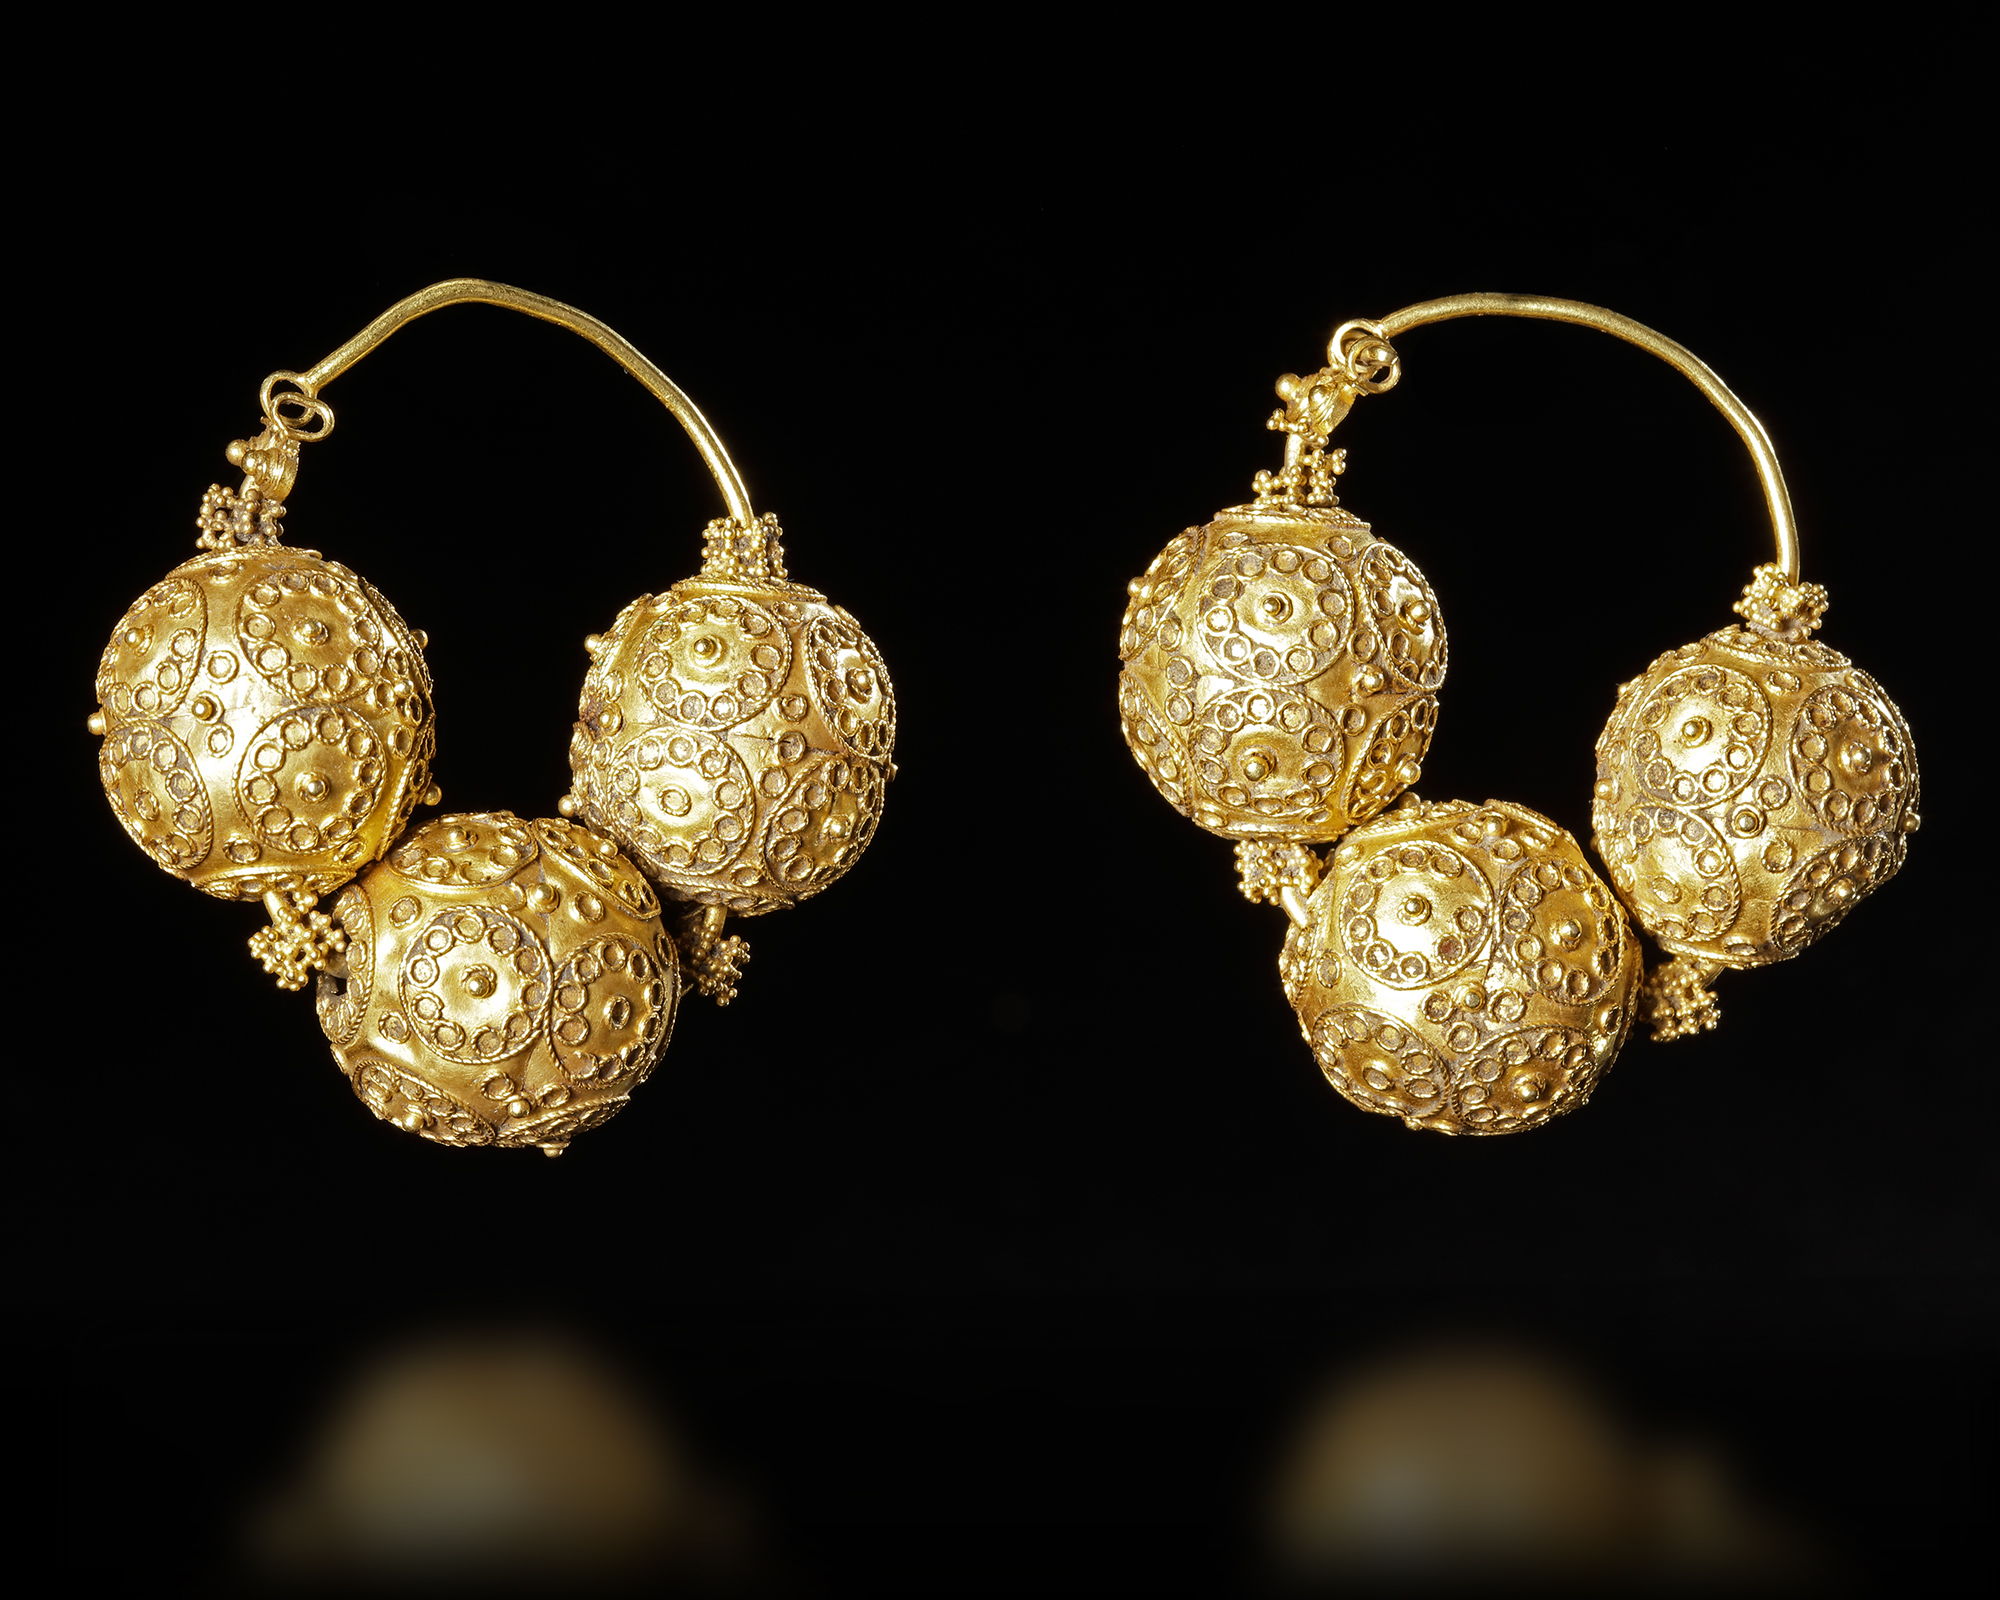 A PAIR OF EARLY ISLAMIC GOLD EARRINGS, 12TH CENTURY - Image 2 of 6